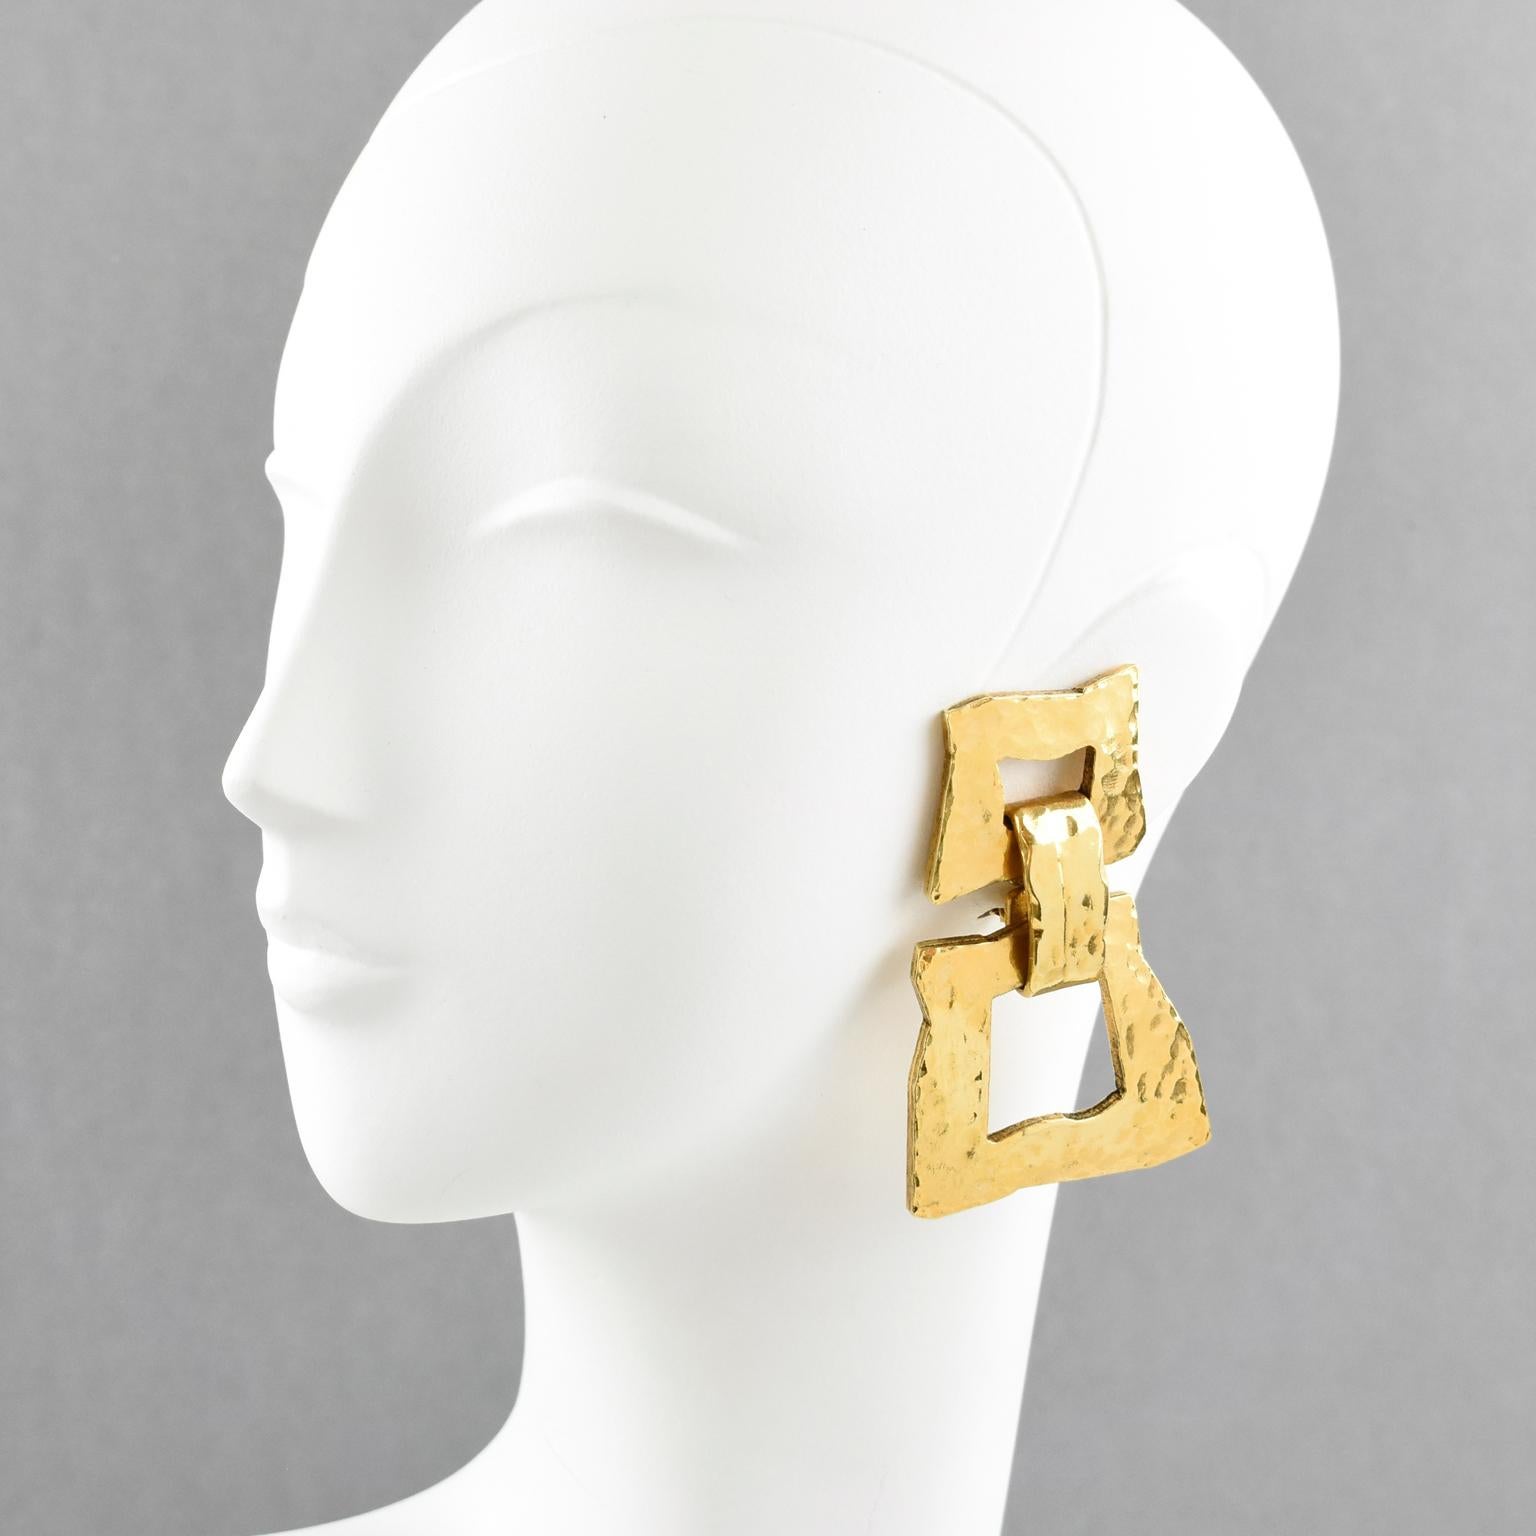 Very chic Mercedes Robirosa Paris signed clip on earrings. Fabulous oversized modernist style with dangling geometric shape and gilt metal all textured and lightly hammered. Signed at the back with brand tiny logo.
Measurements: 3.07 in. long (7.8